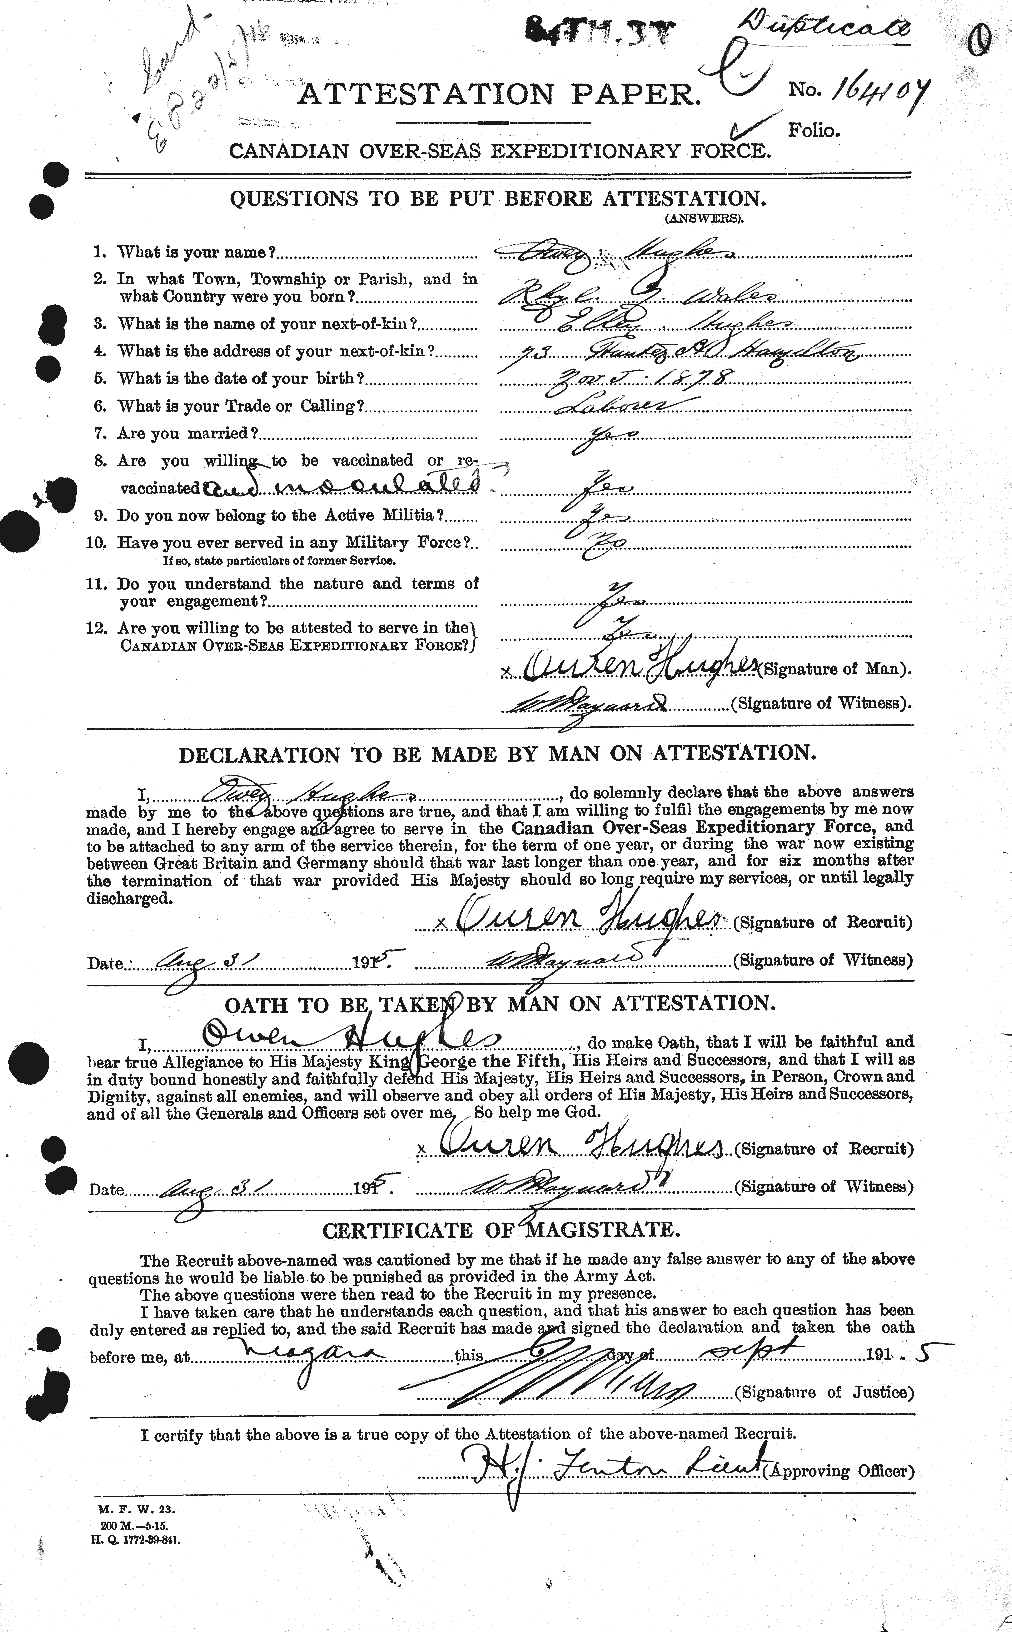 Personnel Records of the First World War - CEF 404140a